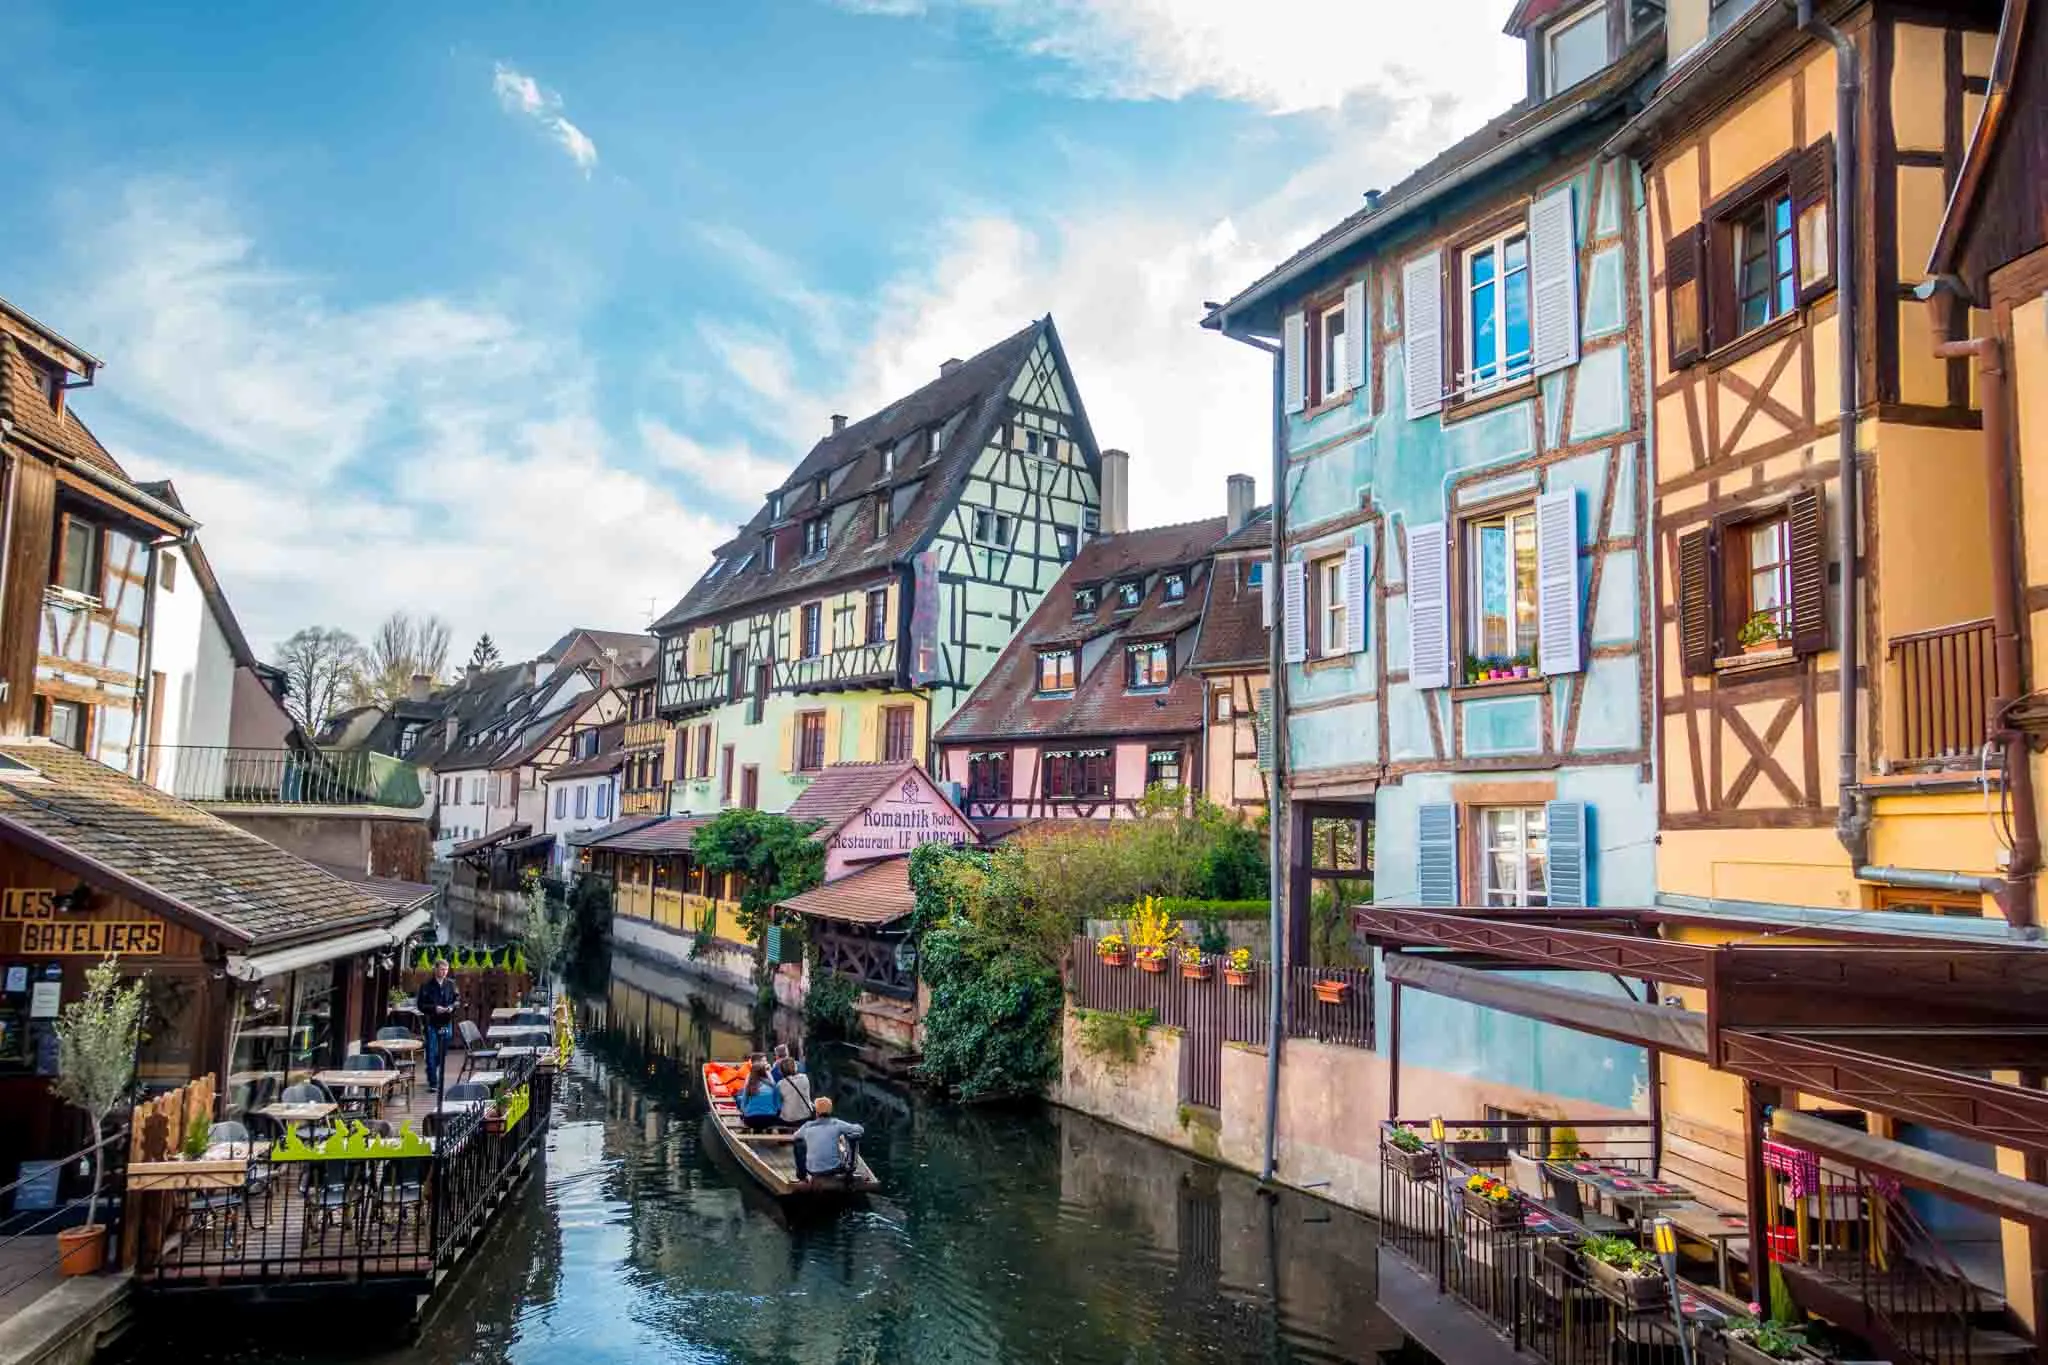 Boat floating past colorful buildings in Petite Venise in Alsace